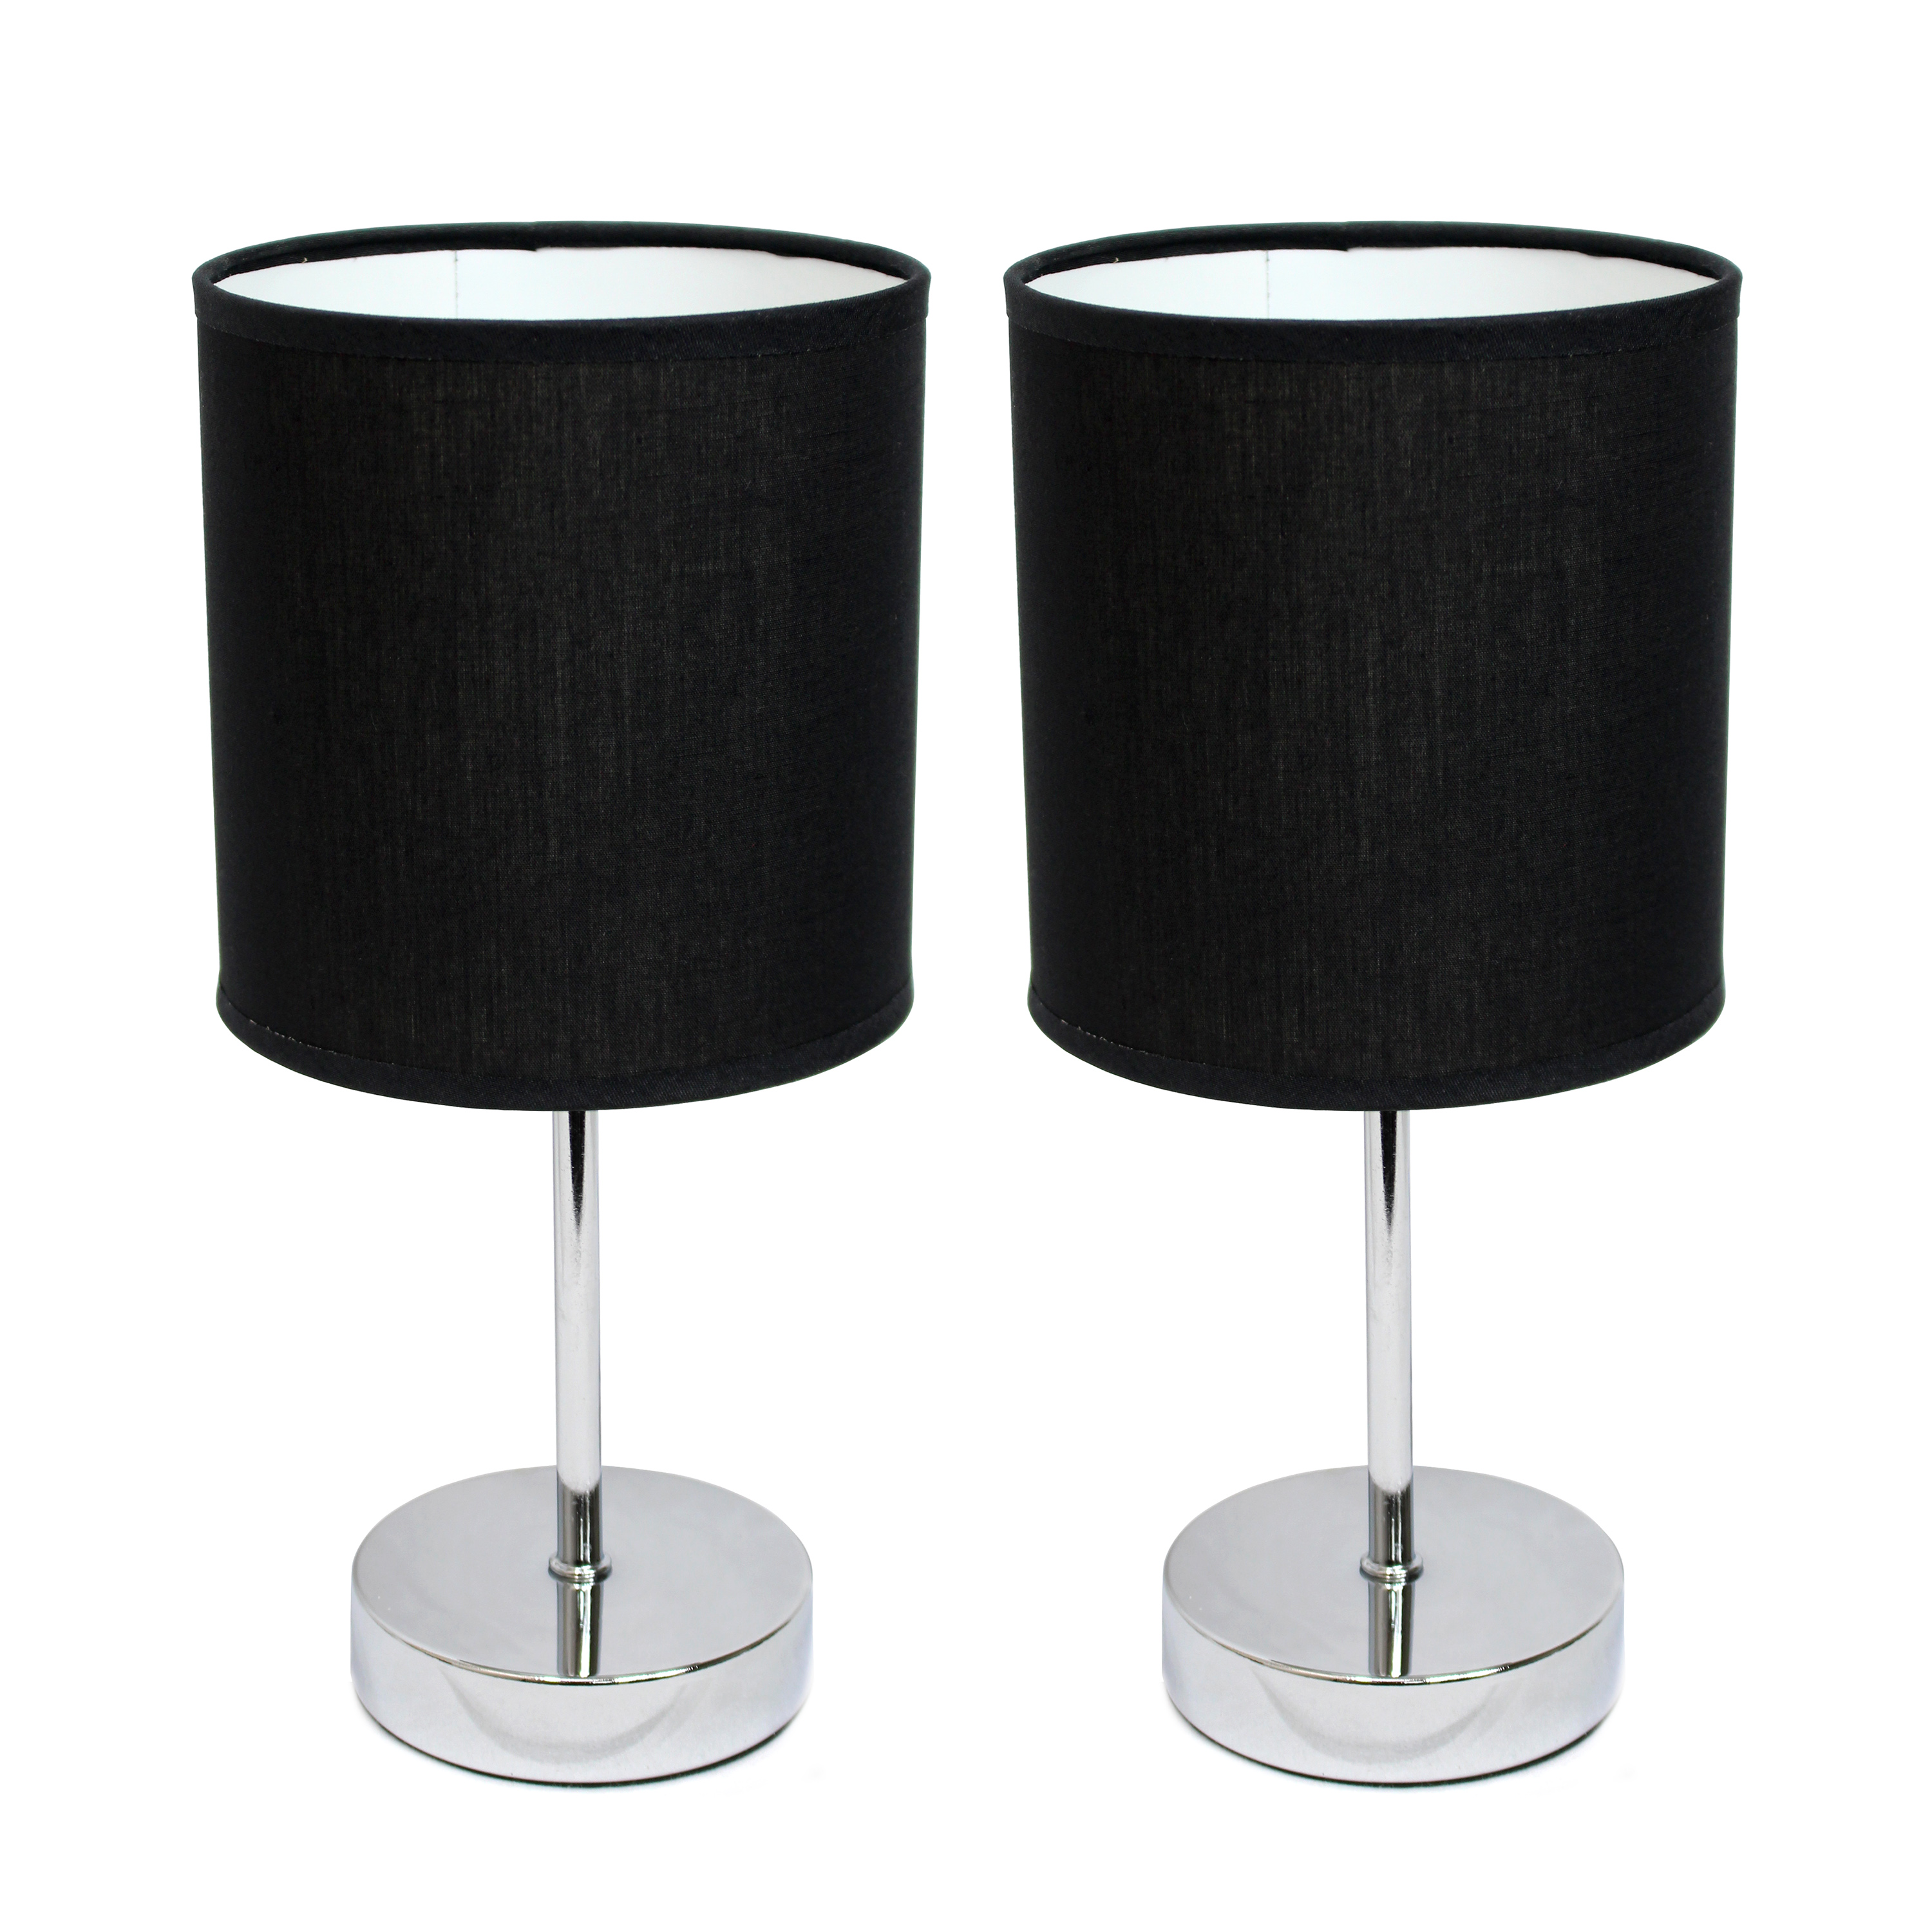 Simple Designs 11.81" 2-Pack Basic Chrome Mini Table Lamp Set with Fabric Shades, Black - image 1 of 6